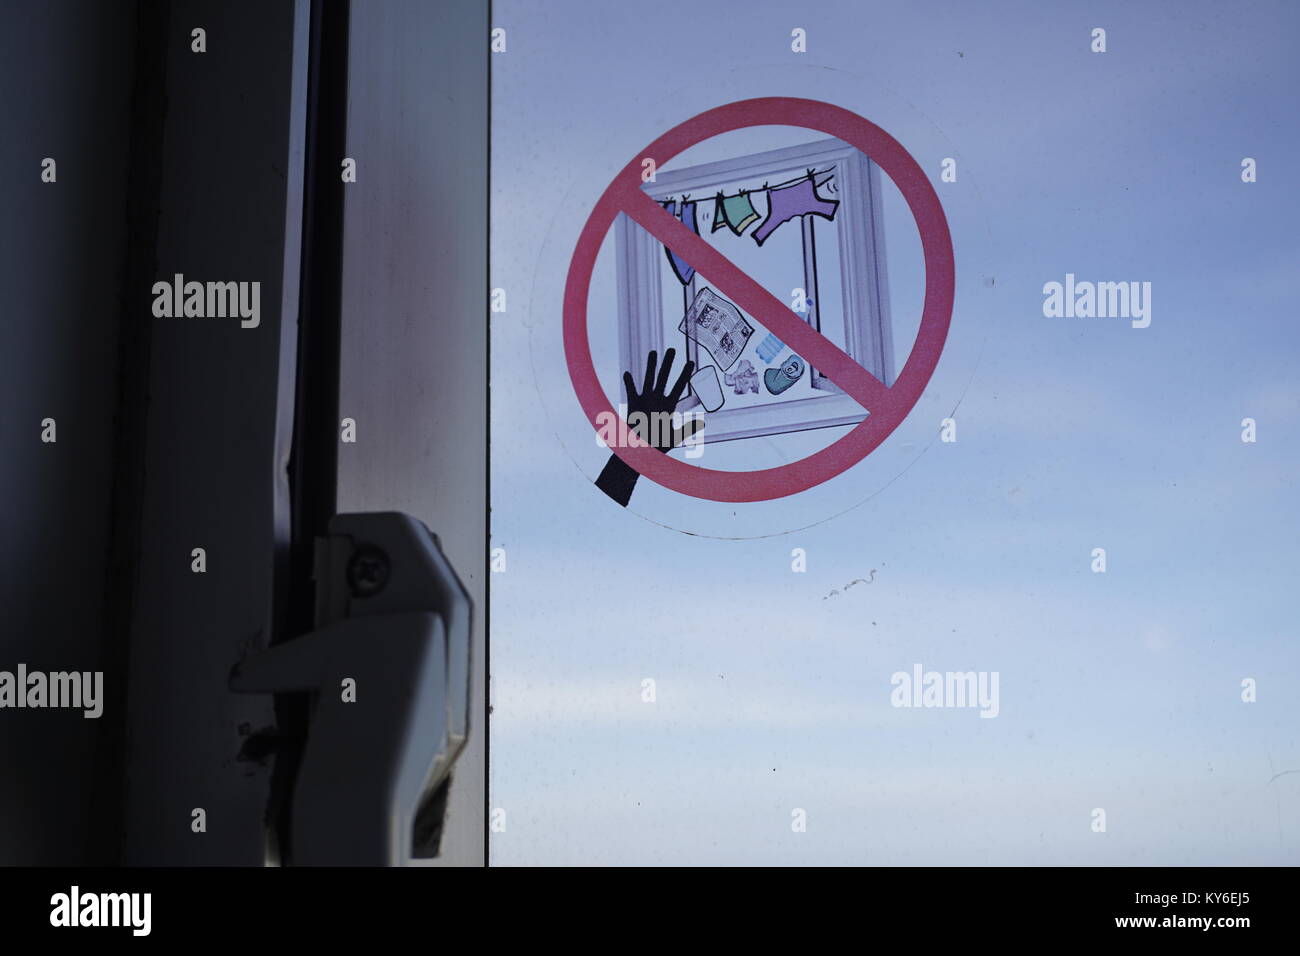 Do not throw rubbish or hang laundry outside window Stock Photo